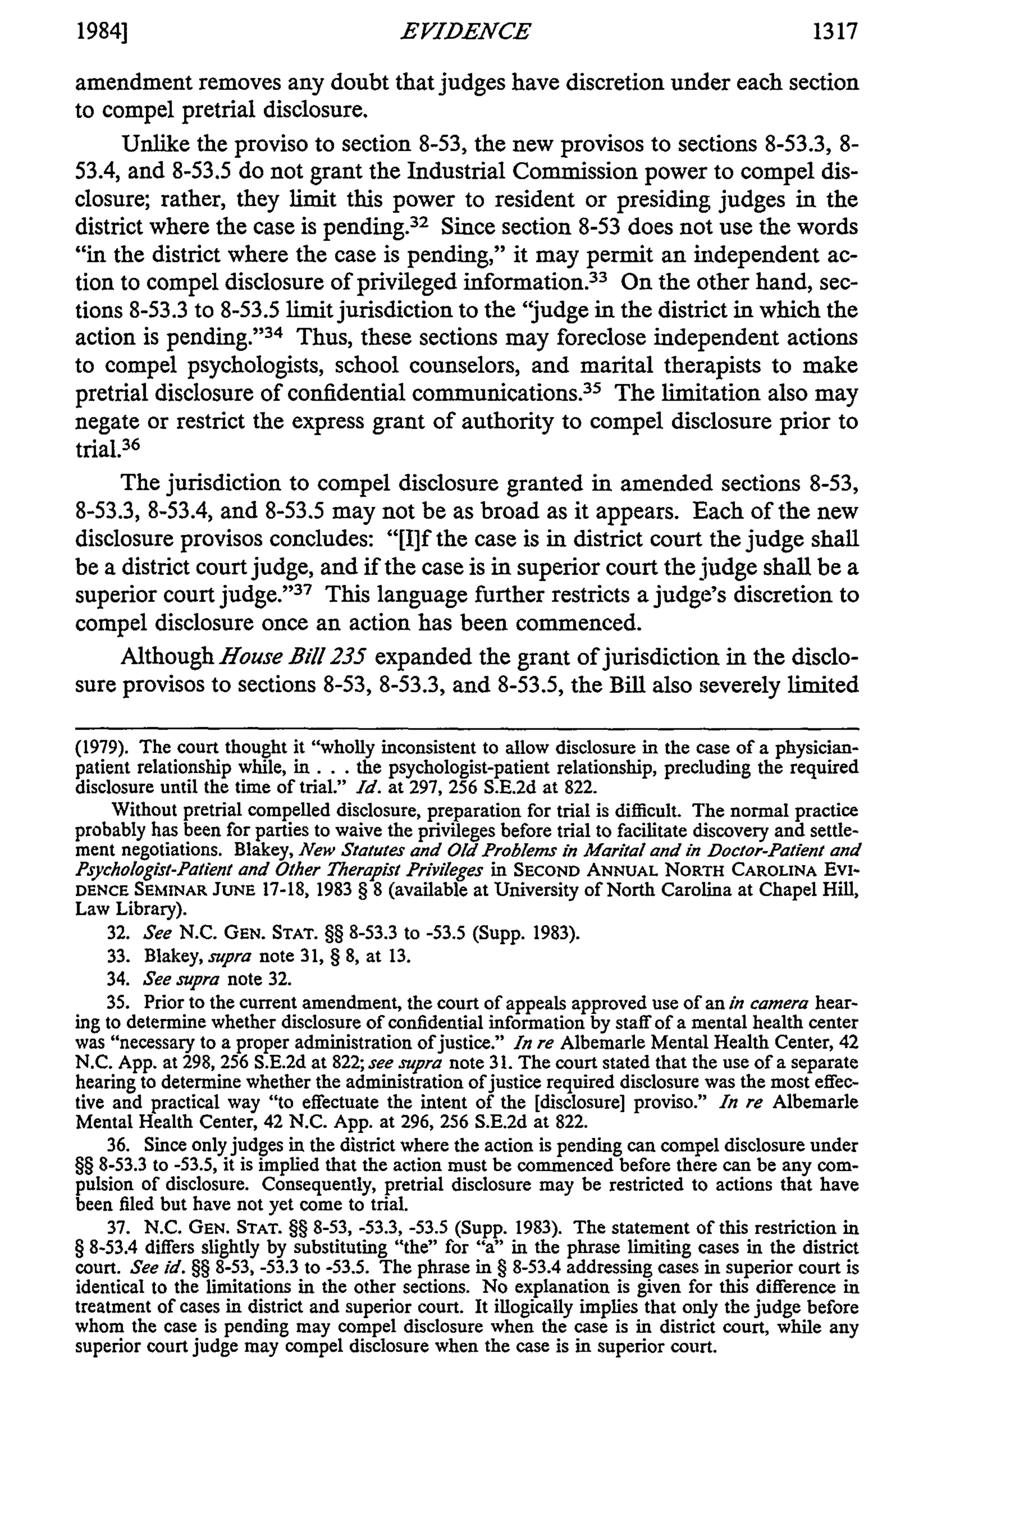 1984] 1317 EVIDENCE amendment removes any doubt that judges have discretion under each section to compel pretrial disclosure. Unlike the proviso to section 8-53, the new provisos to sections 8-53.